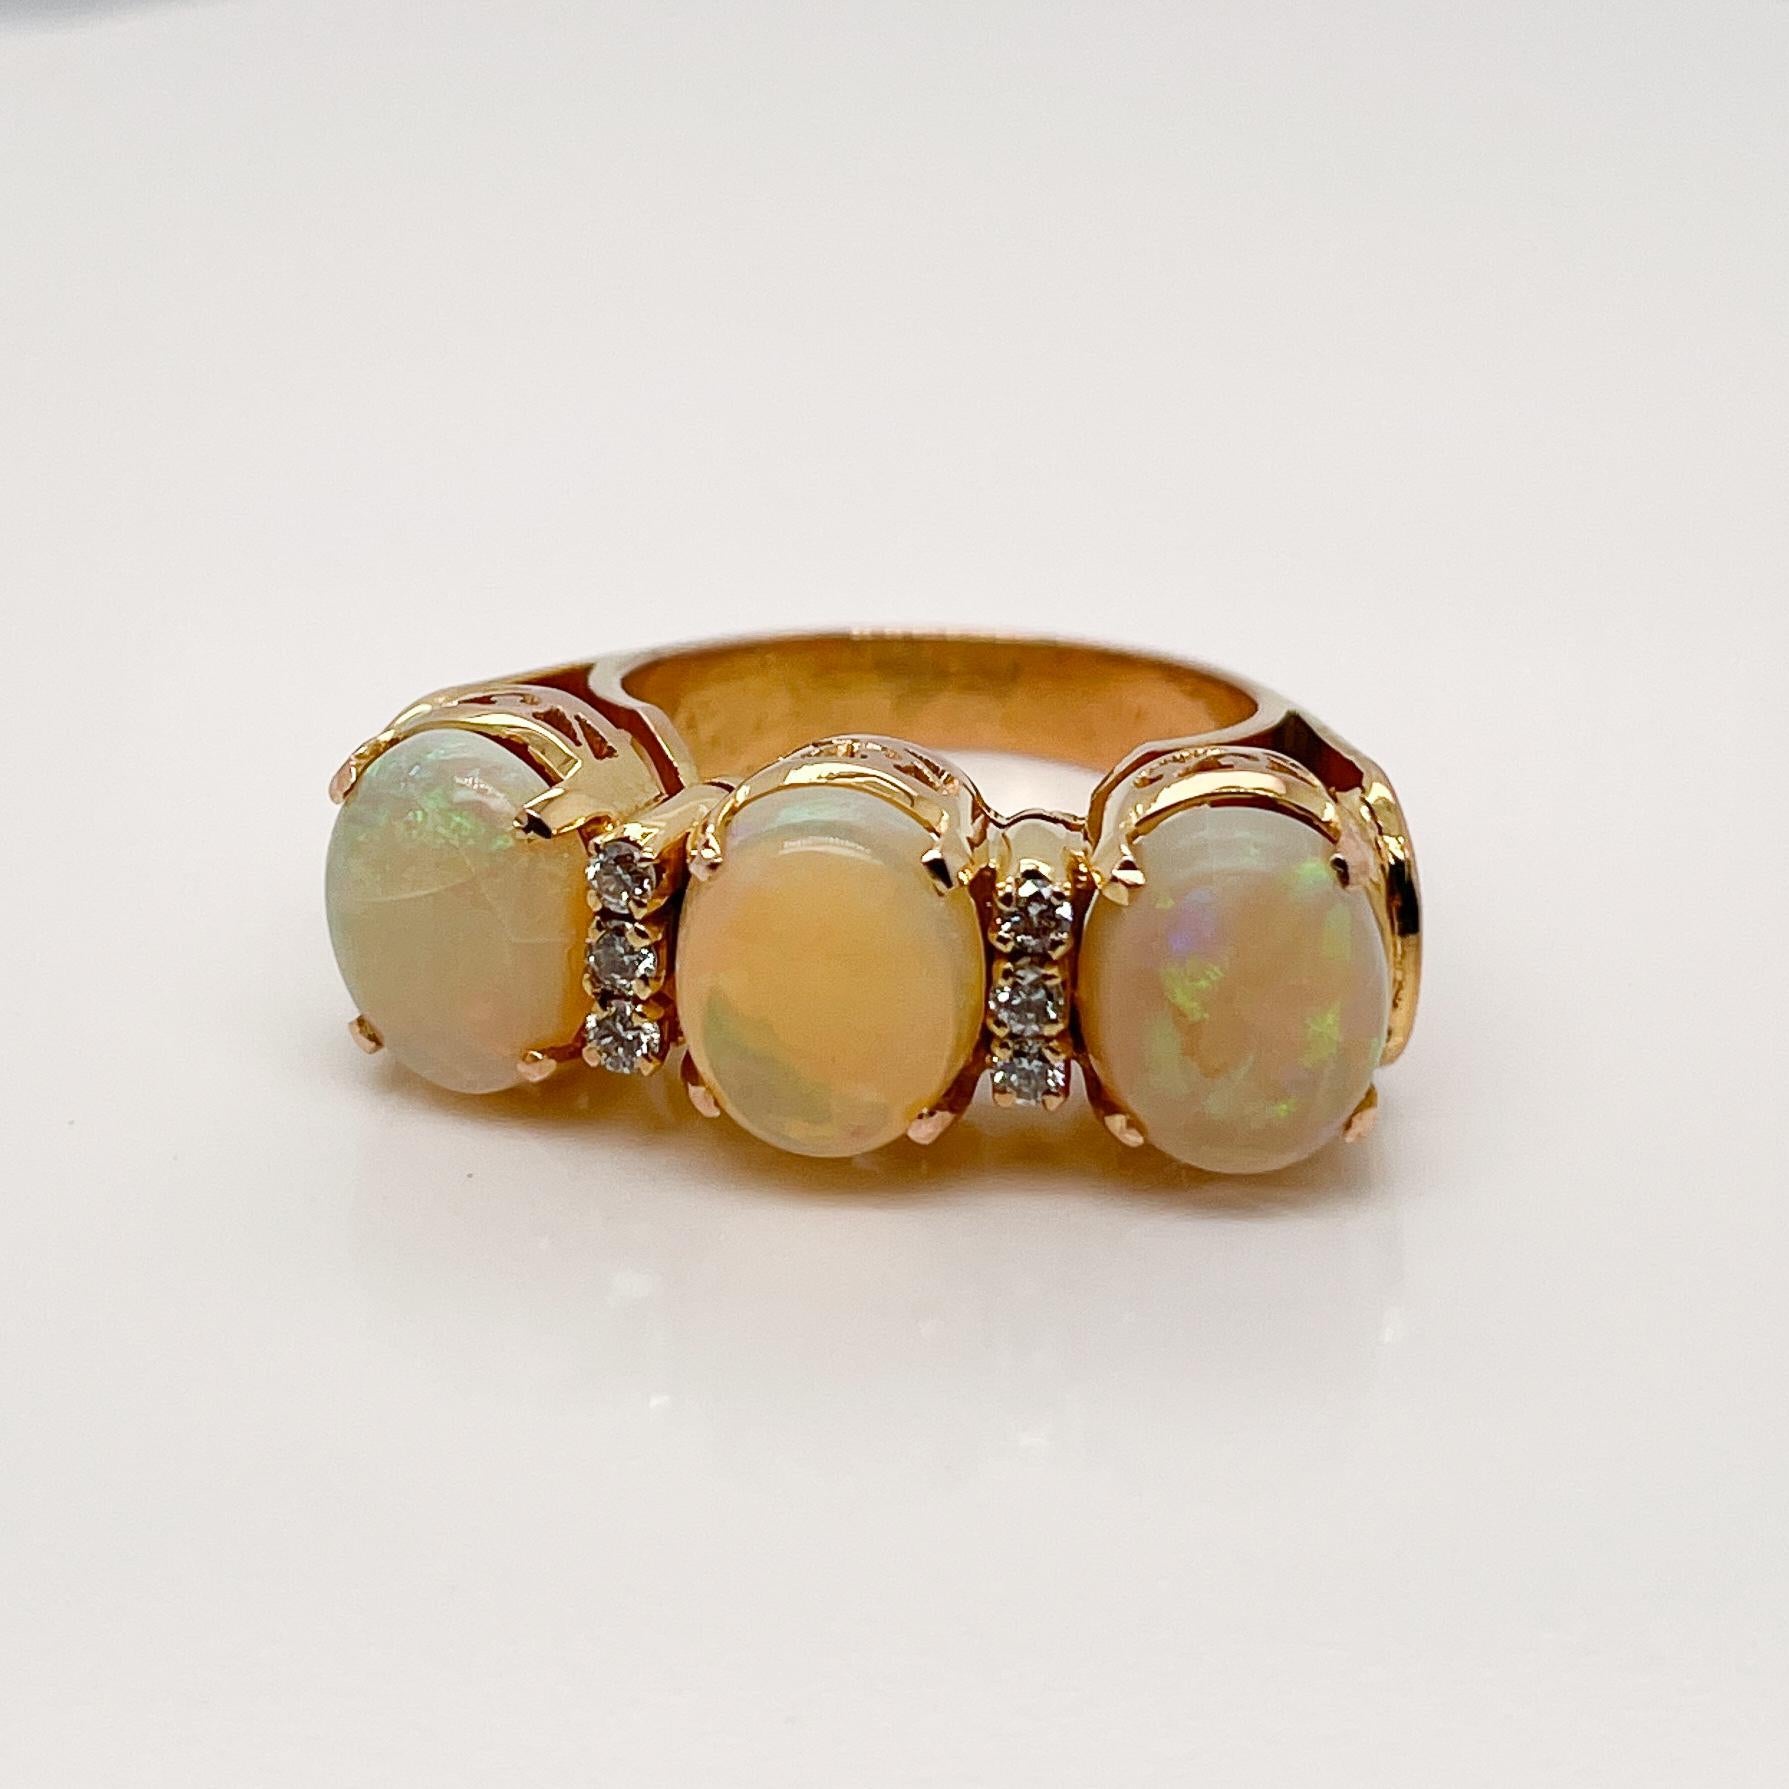 A very fine opal and gold cocktail ring.

With 3 prong-set smooth oval opal cabochons offset by 2 rows with 3 small round brilliant diamonds each. 

In 18k gold.

Simply a wonderful Retro cocktail ring with lovely opals and sparkling